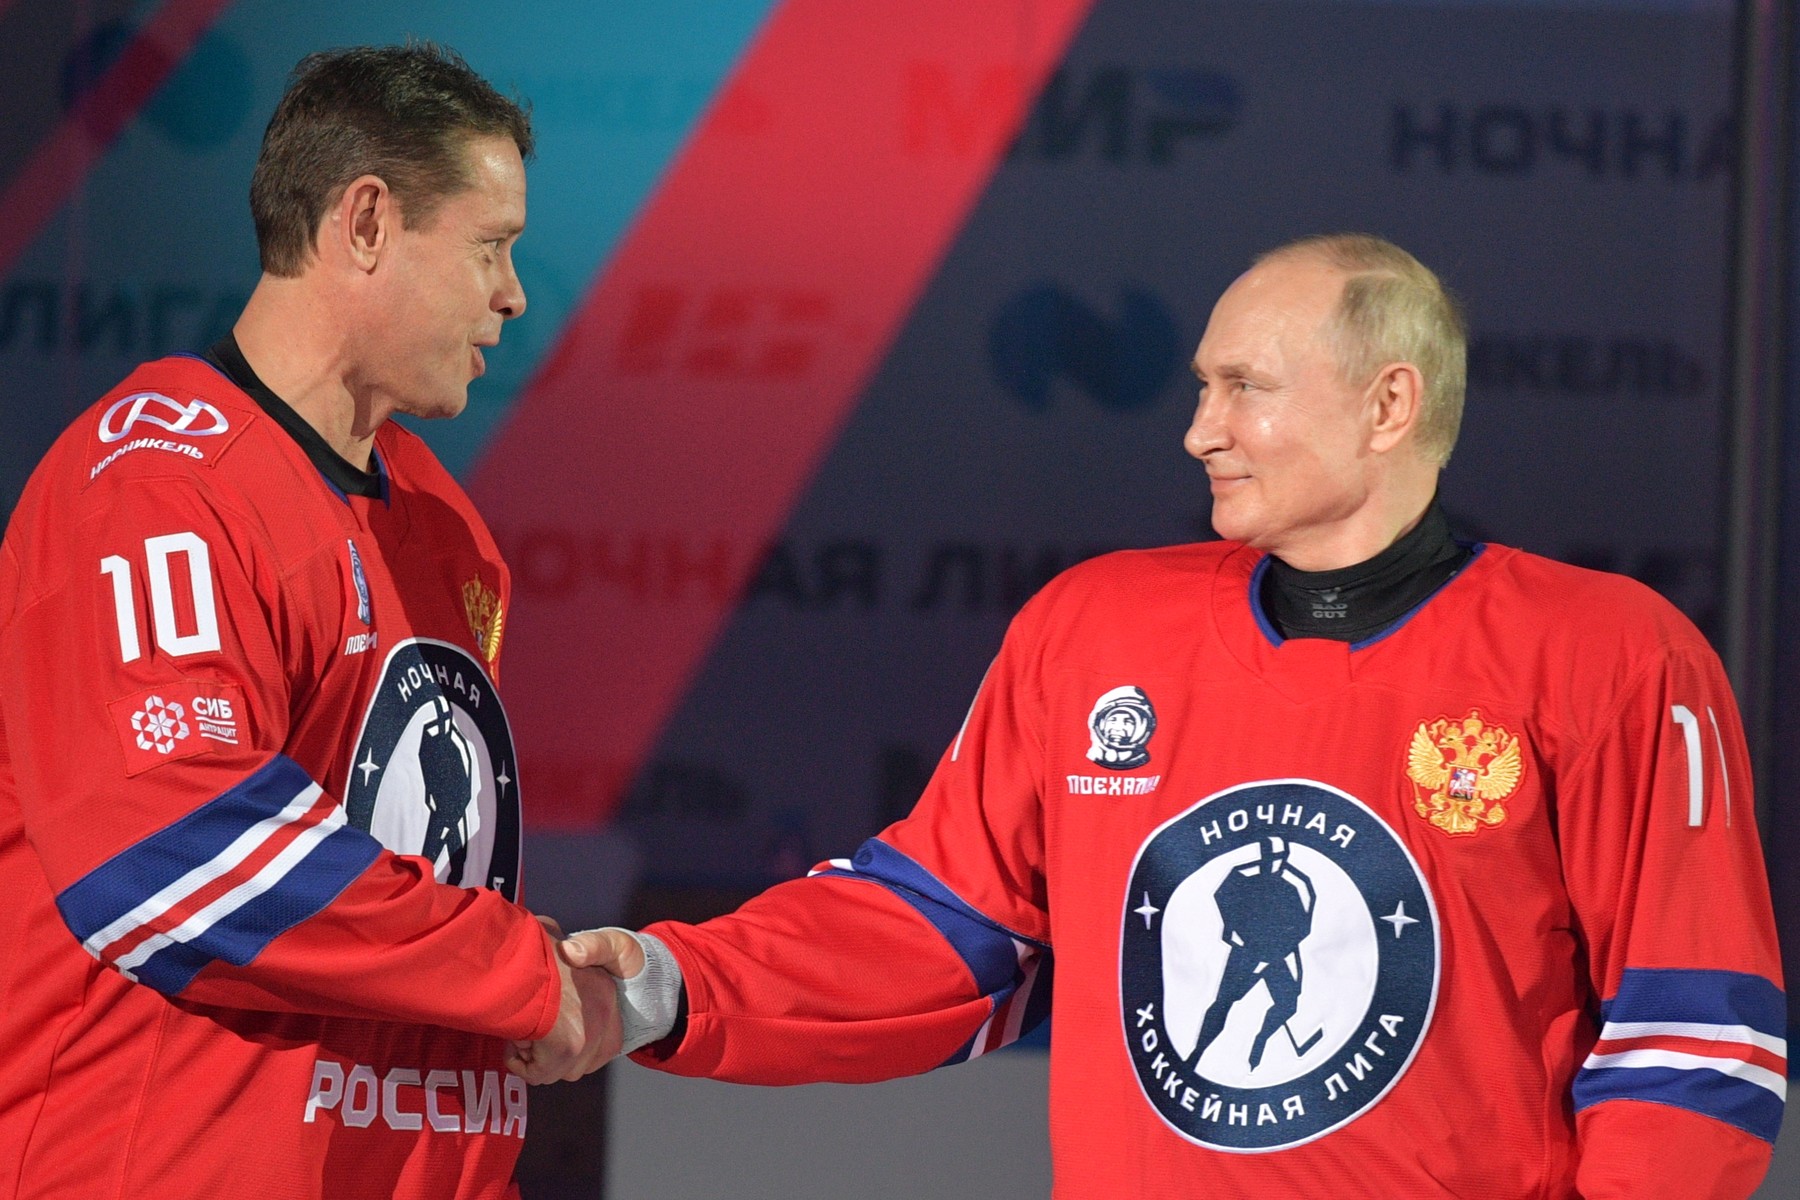 6541101 10.05.2021 President of the World Legends Hockey League Pavel Bure, right, and Russian President Vladimir Putin, as a member of the 